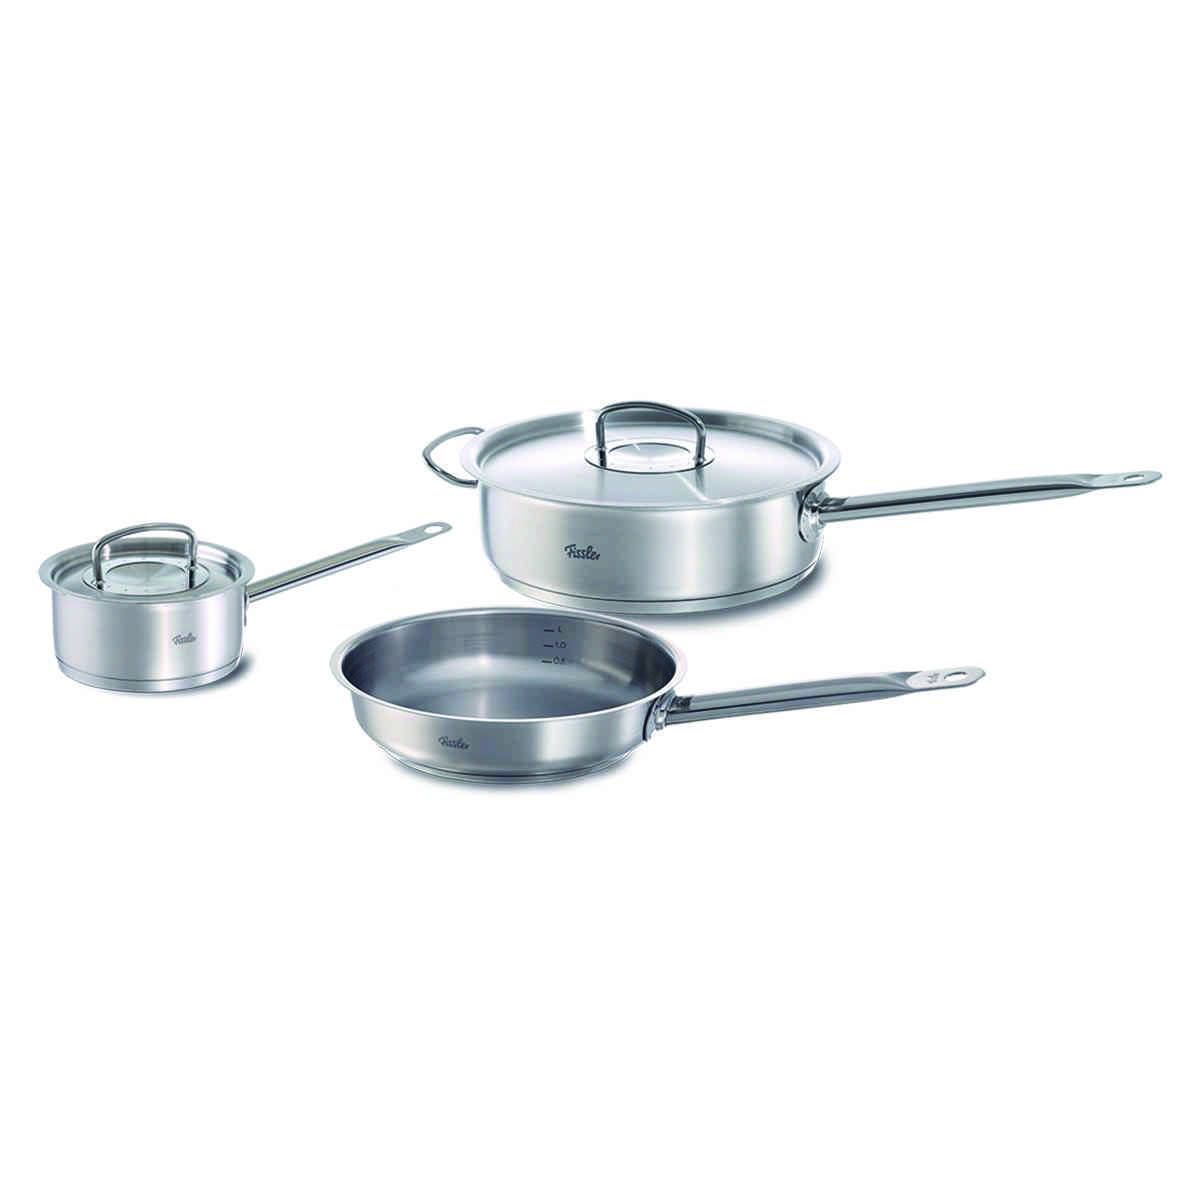 Fissler Stainless Steel 5-Piece Original Profi Cookware Set with Saute and Fry Pan